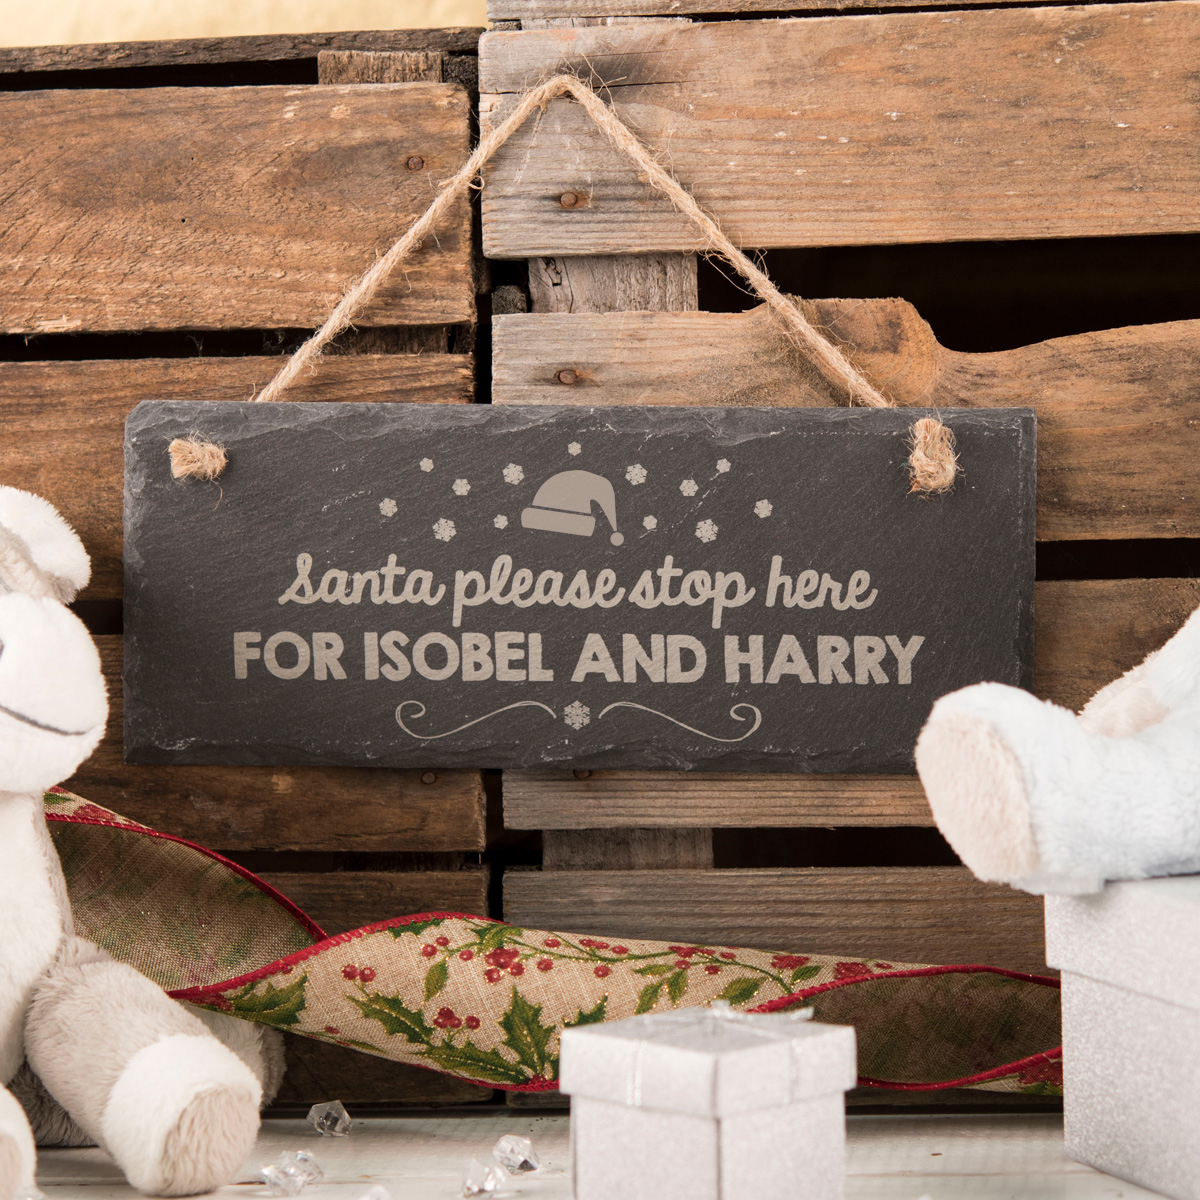 Personalised Hanging Slate Sign - Santa Please Stop Here For